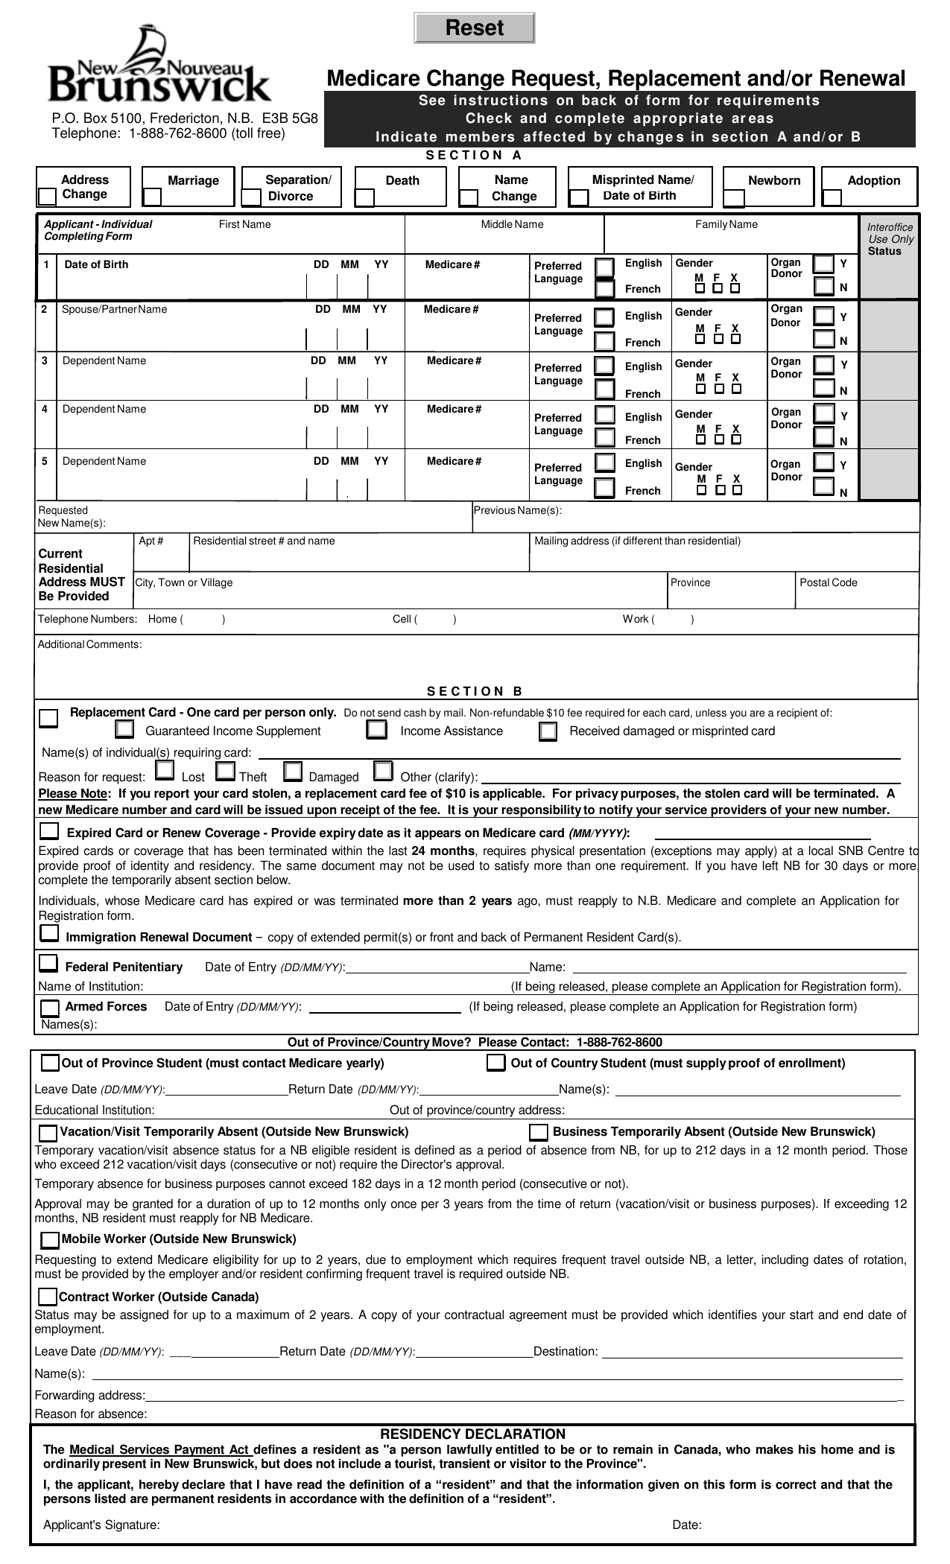 Form 35-5210 Medicare Change Request, Replacement and / or Renewal - New Brunswick, Canada, Page 1